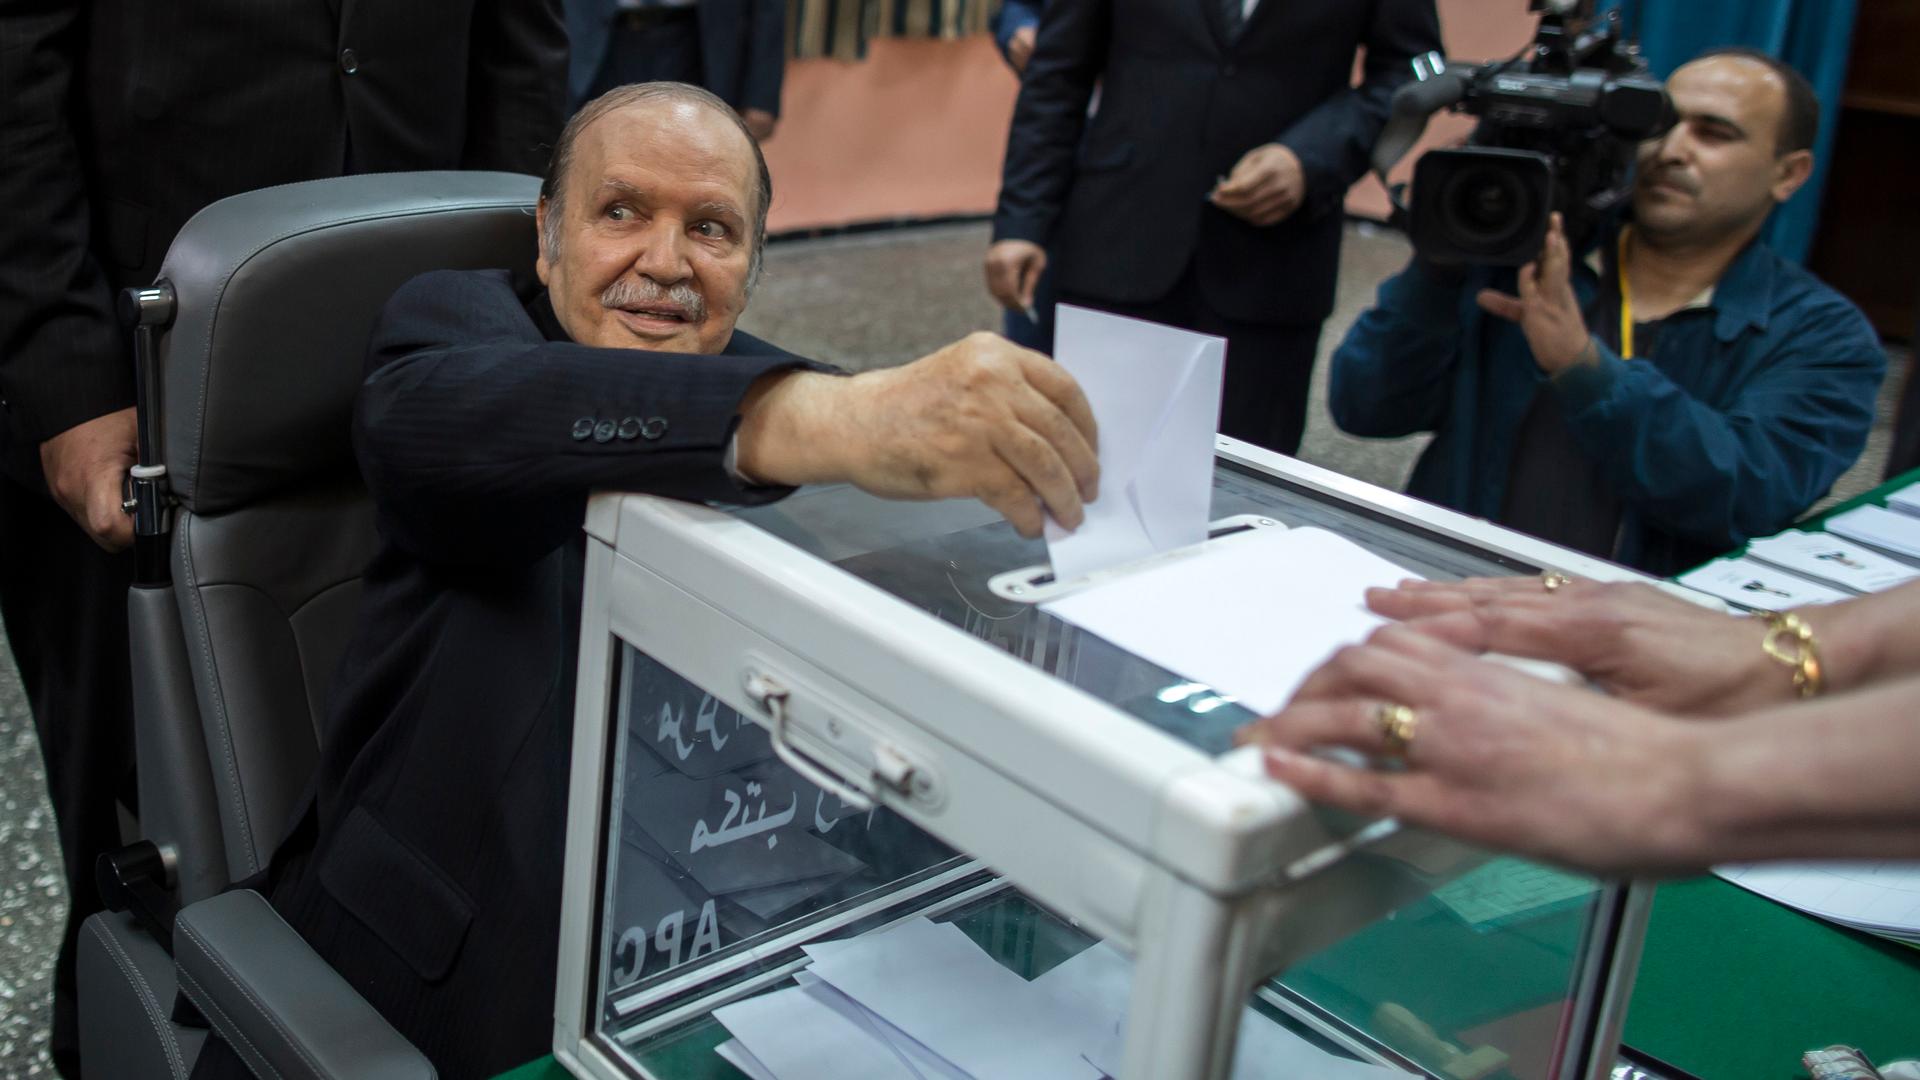 Algeria's President Abdelaziz Bouteflika casts his ballot during the presidential election in Algiers April 17, 2014. Algerians voted on Thursday in the election Bouteflika is expected to win after 15 years in power.